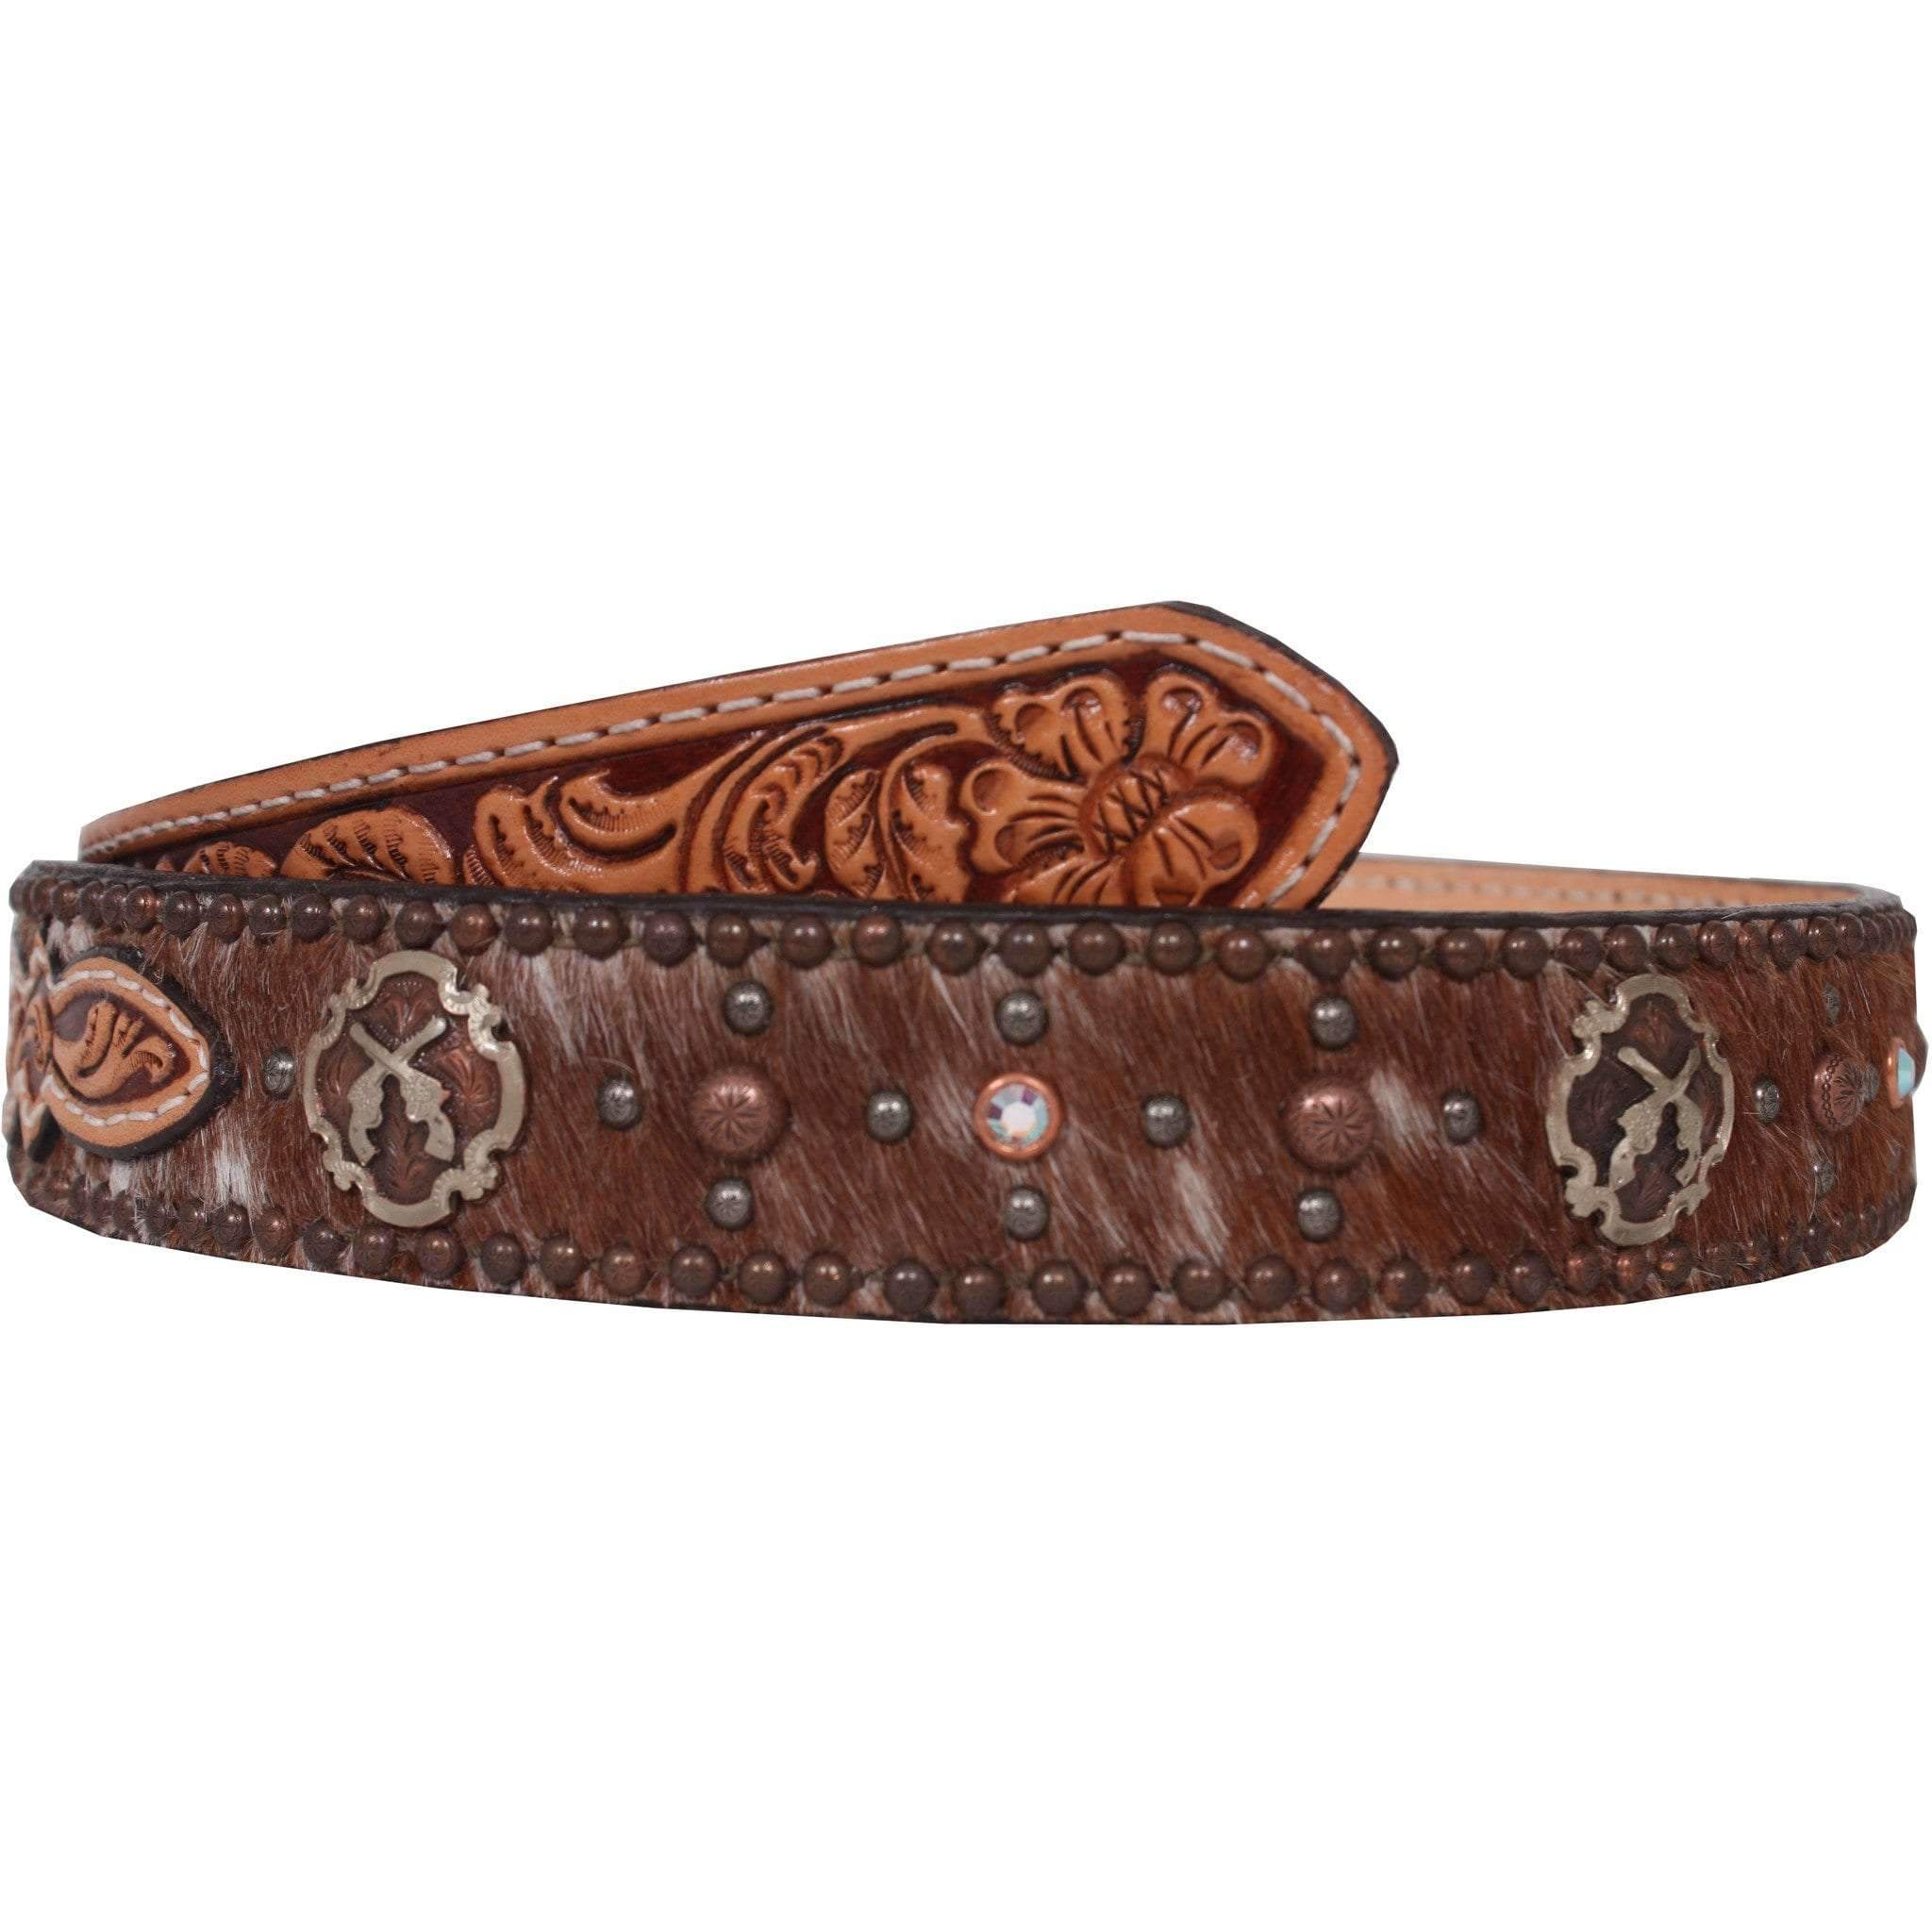 B046 - Roan Hair and Floral Tooled Belt - Double J Saddlery